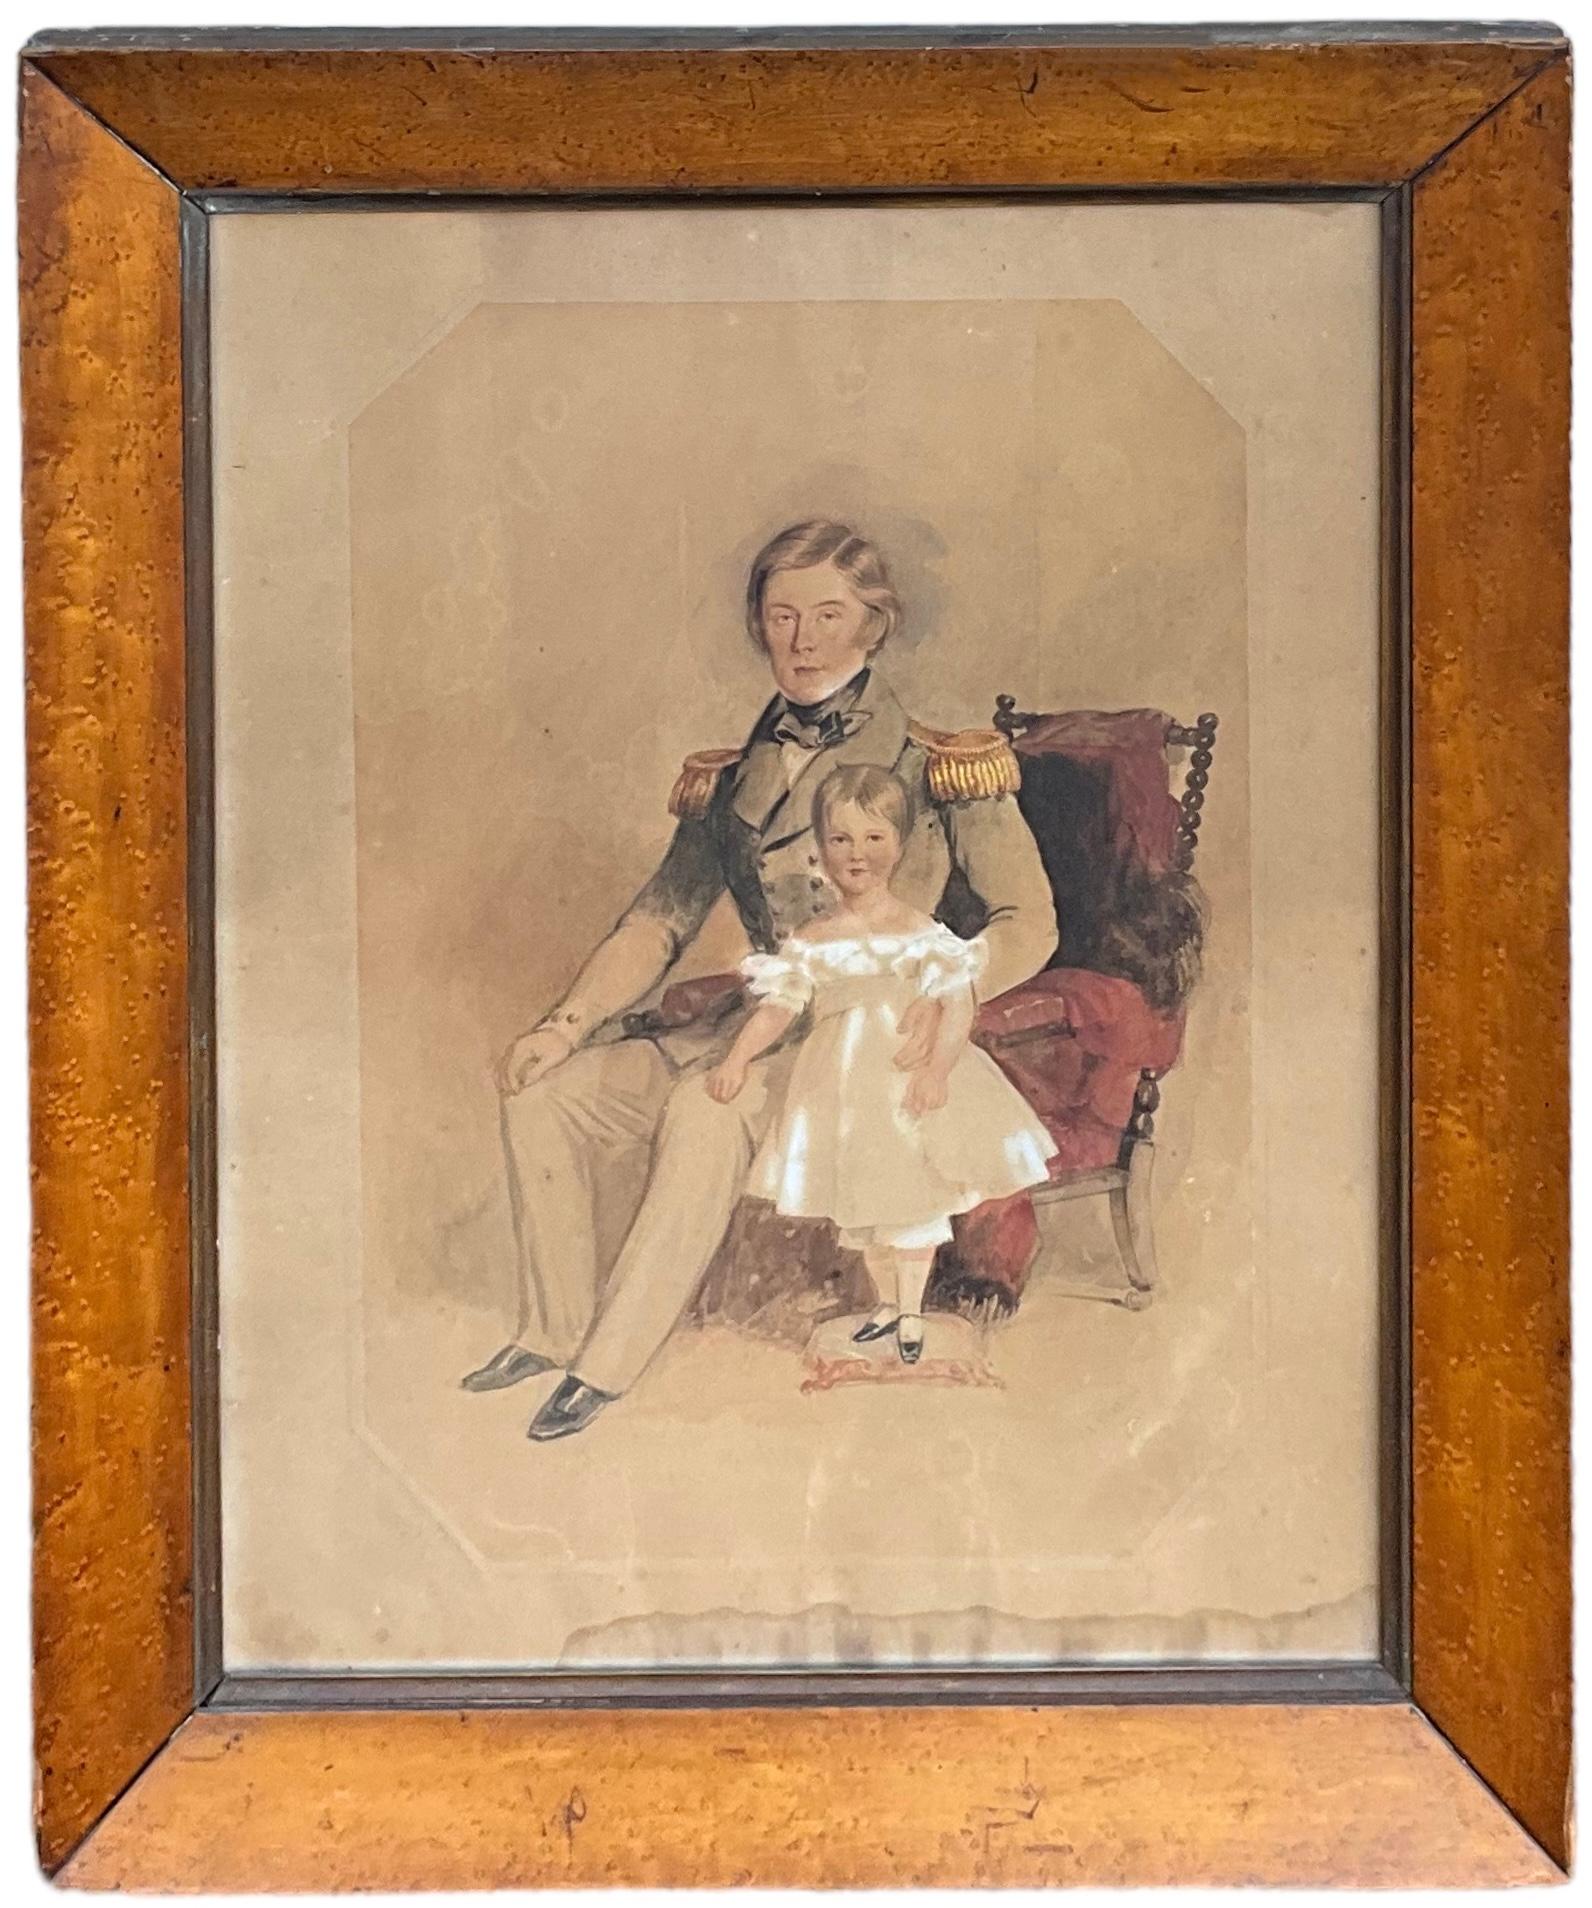 Aesthetic Movement 19th-C. English Sea Ship Captain W/ Child Watercolor on Paper In Burl Frame  For Sale